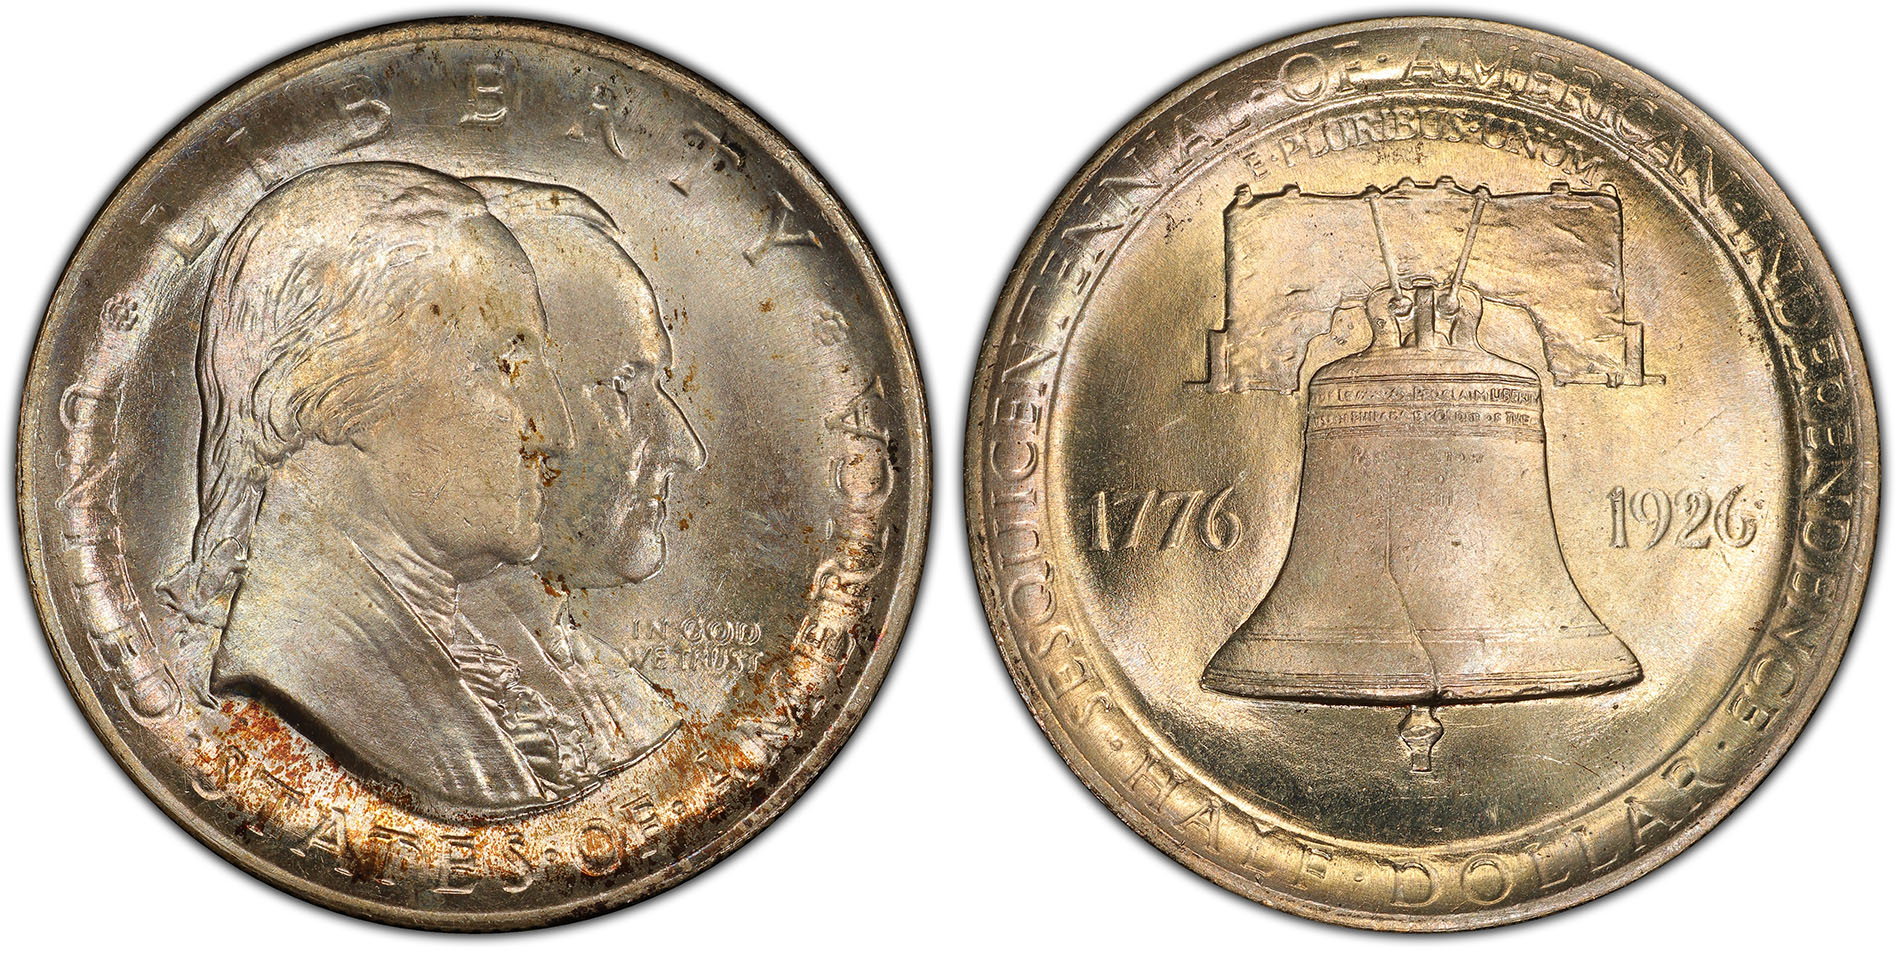 Classic Coinage Revived: The 2016 Centennial Series Gold Mercury